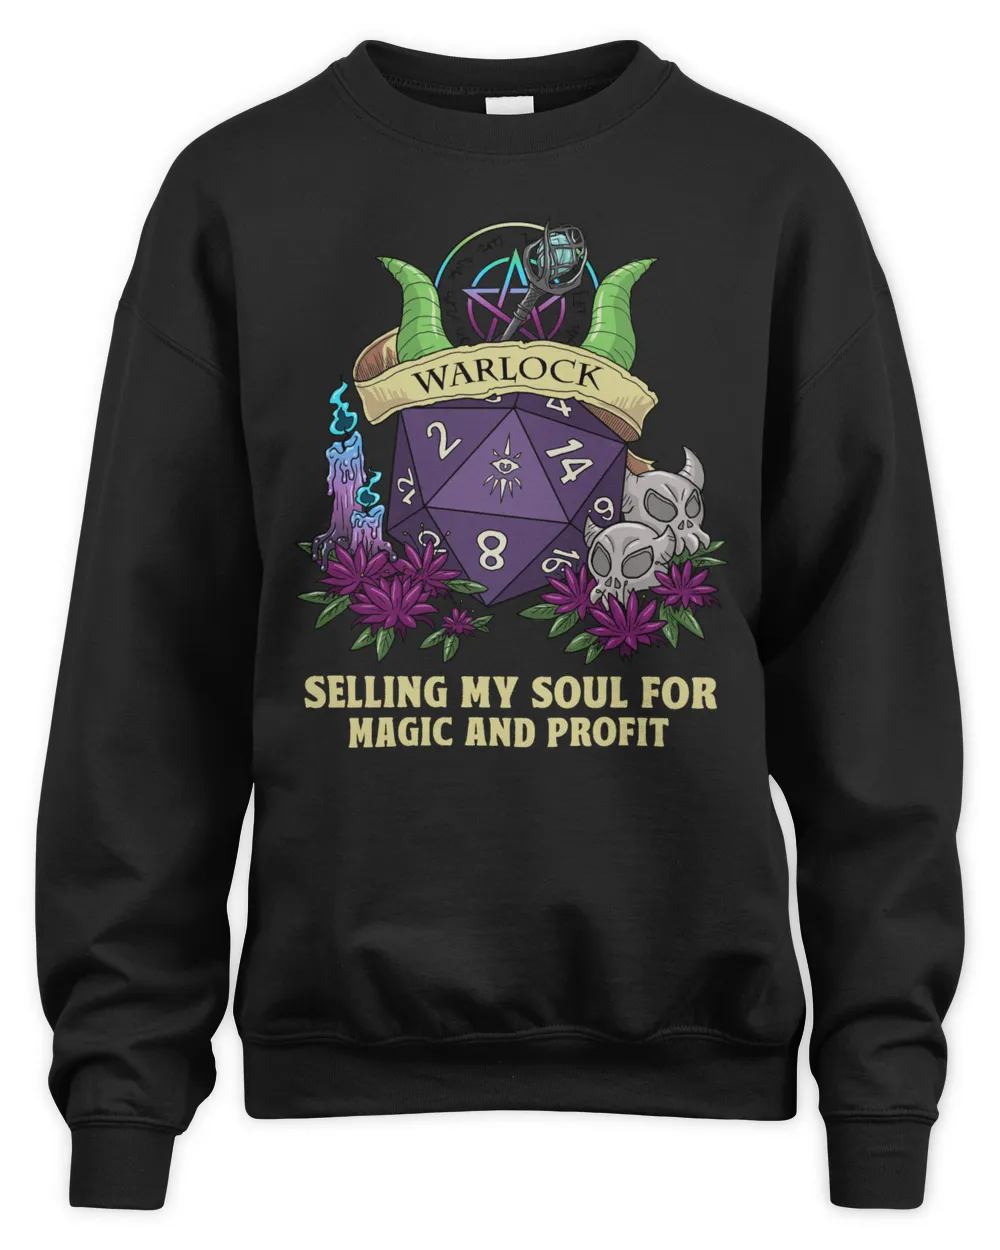 Warlock Selling My Soul For Magic And Profit, Dungeons and Dragons, DnD, RPG Gift, Dungeon Master Shirt Unisex Sweatshirt black 